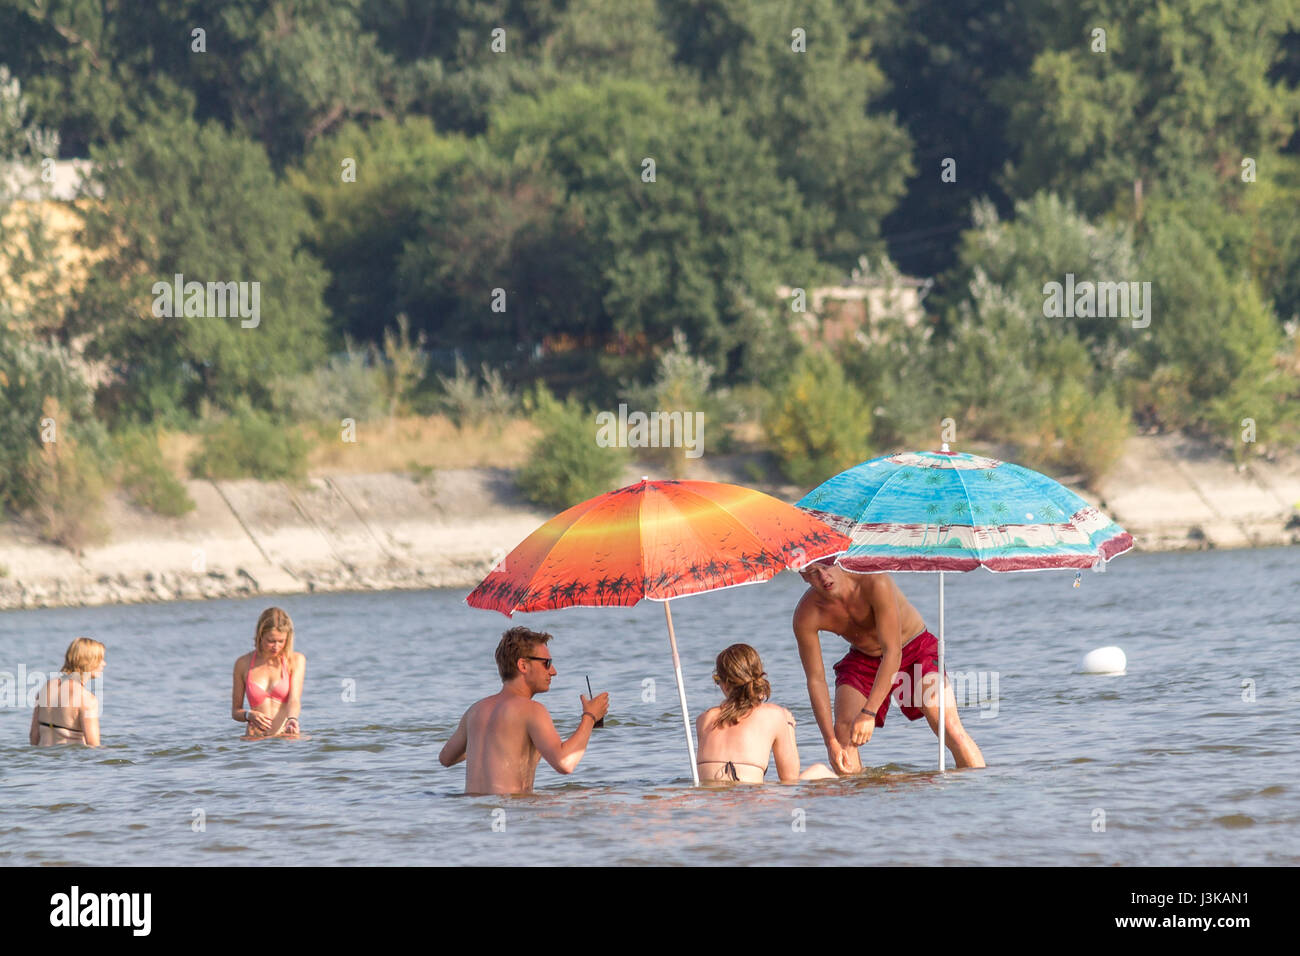 People sitting in the Danube River during the Sziget Festival in Budapest, Hungary Stock Photo